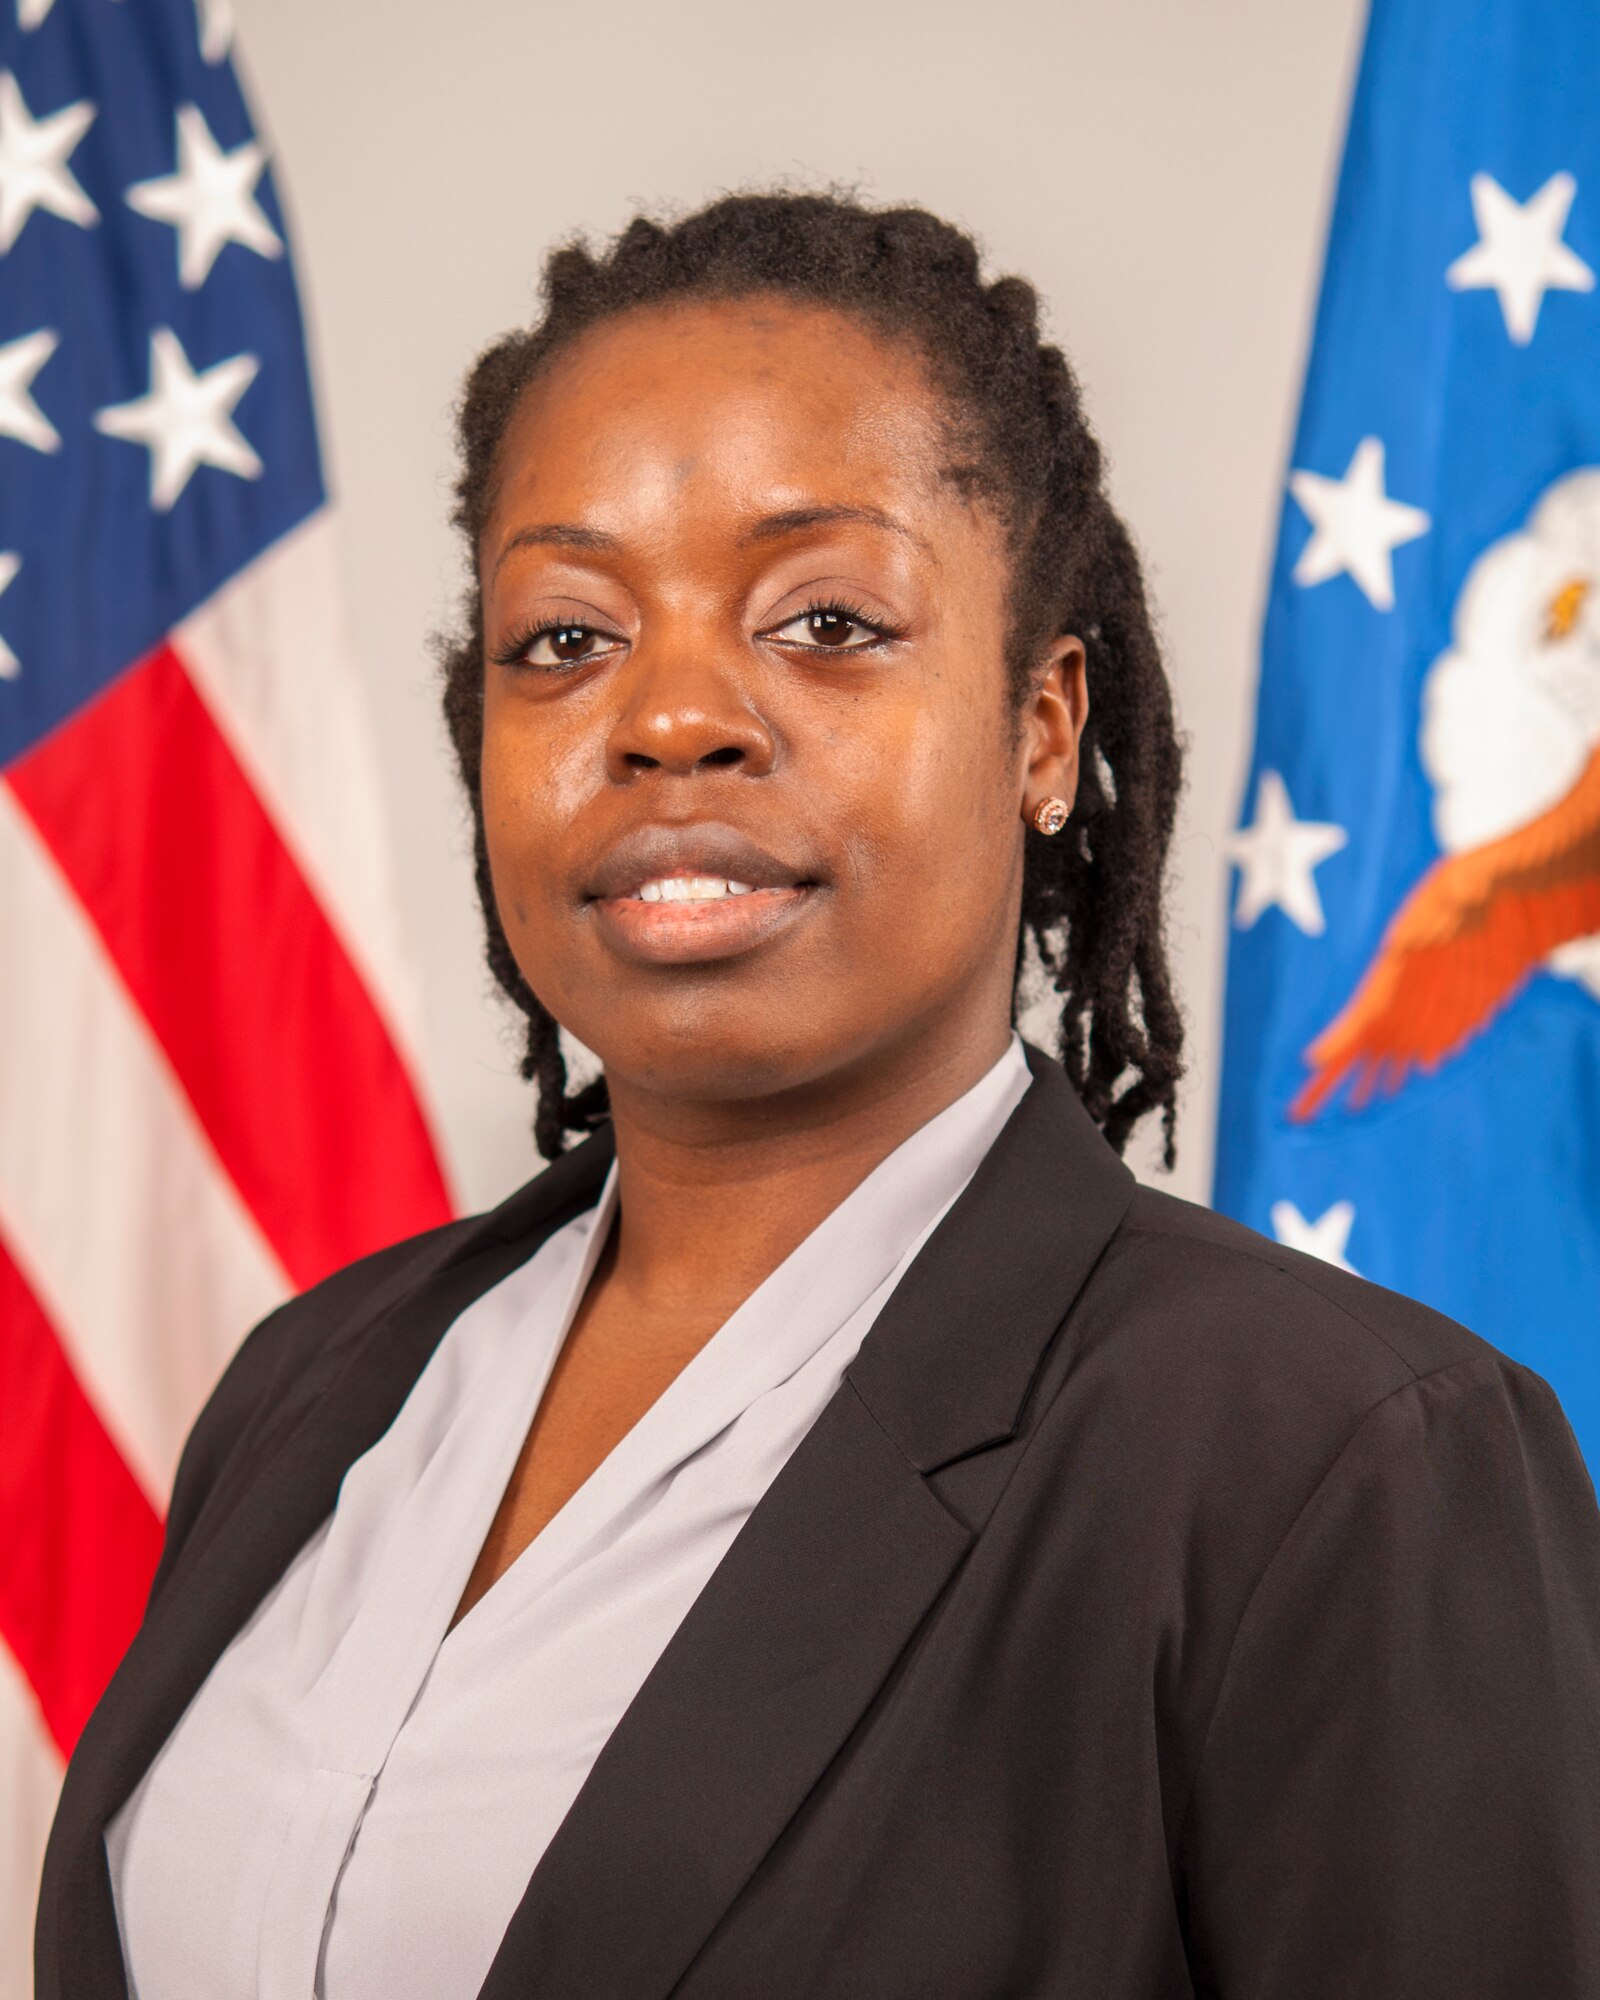 Since November 2018, Staff Sgt. Ami Malone, has served in a unique position while with the 434th Security Forces Squadron, Air Refueling Wing, Grissom Air Reserve Base, Ind. She operates as a dual role member to the Office of Special Investigations, 1st Field Investigative Region, 10th Field Investigative Squadron, Operating Location Delta, at Grissom. Here, she is pictured through the glass of the interview room at Grissom. (U.S. Air Force photo by Master Sgt. Benjamin Mota)